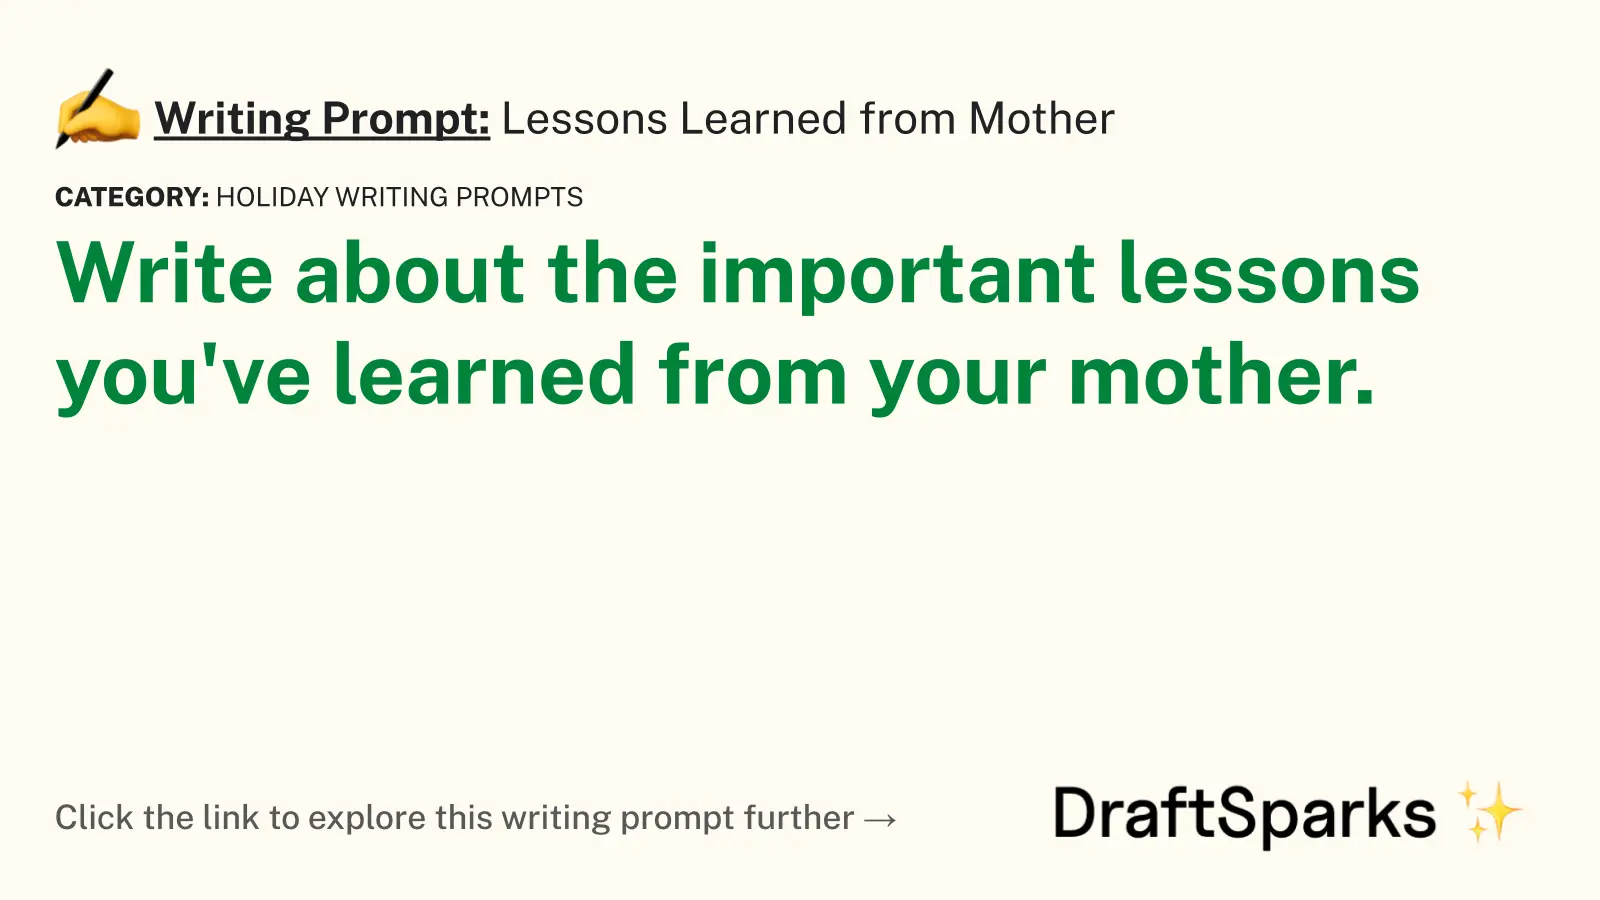 Lessons Learned from Mother